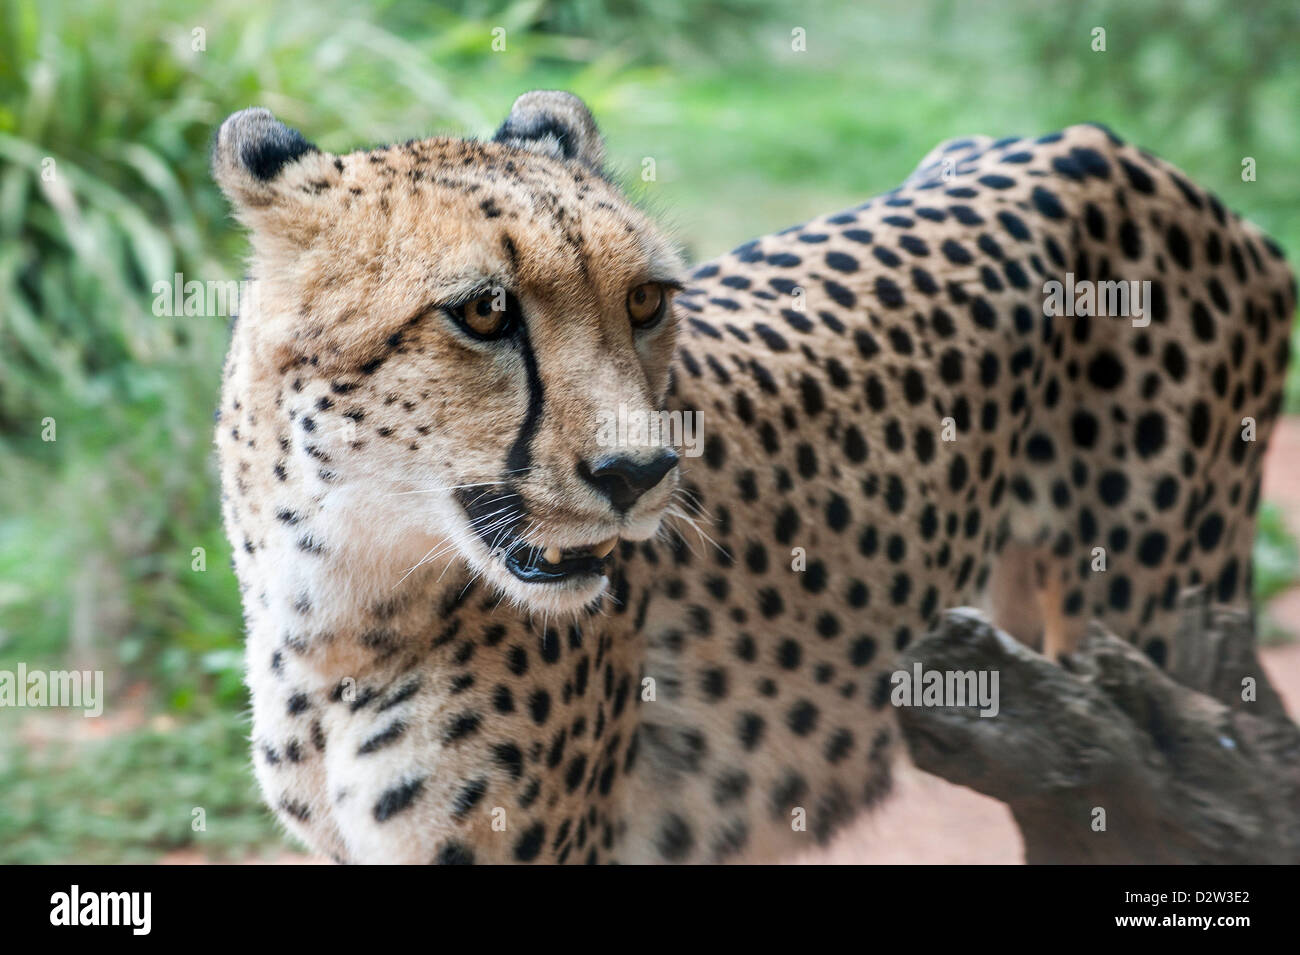 A close-up photograph of a cheetah gazing into the distance looking for prey Stock Photo